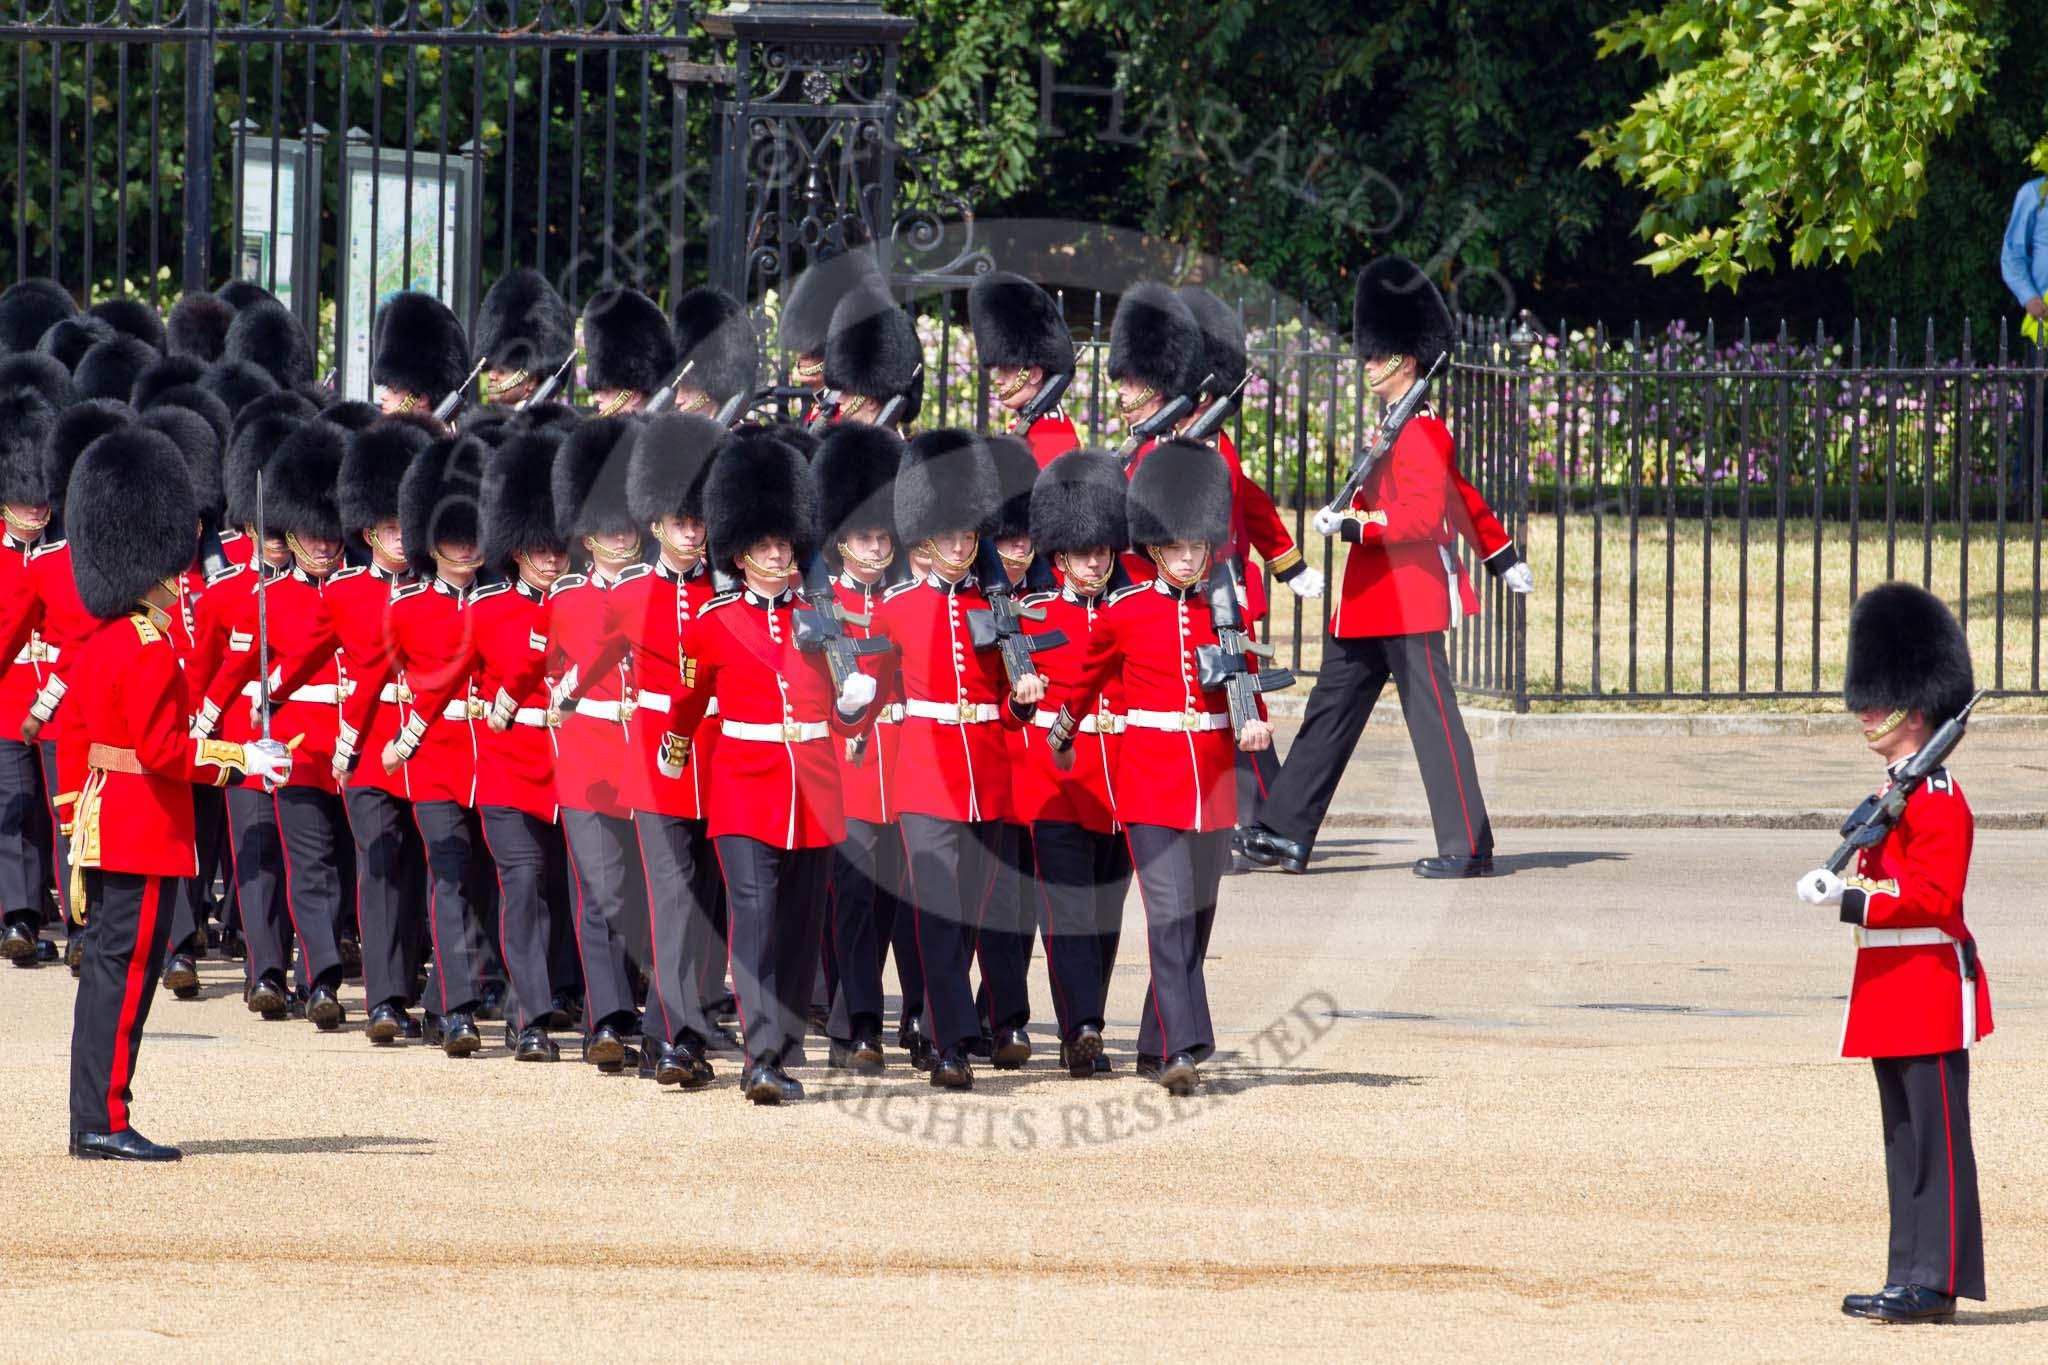 The Colonel's Review 2011: No. 3 Guard, F Company Scots Guards, marching onto the parade ground. In the background St. James's Park..
Horse Guards Parade, Westminster,
London SW1,

United Kingdom,
on 04 June 2011 at 10:27, image #26